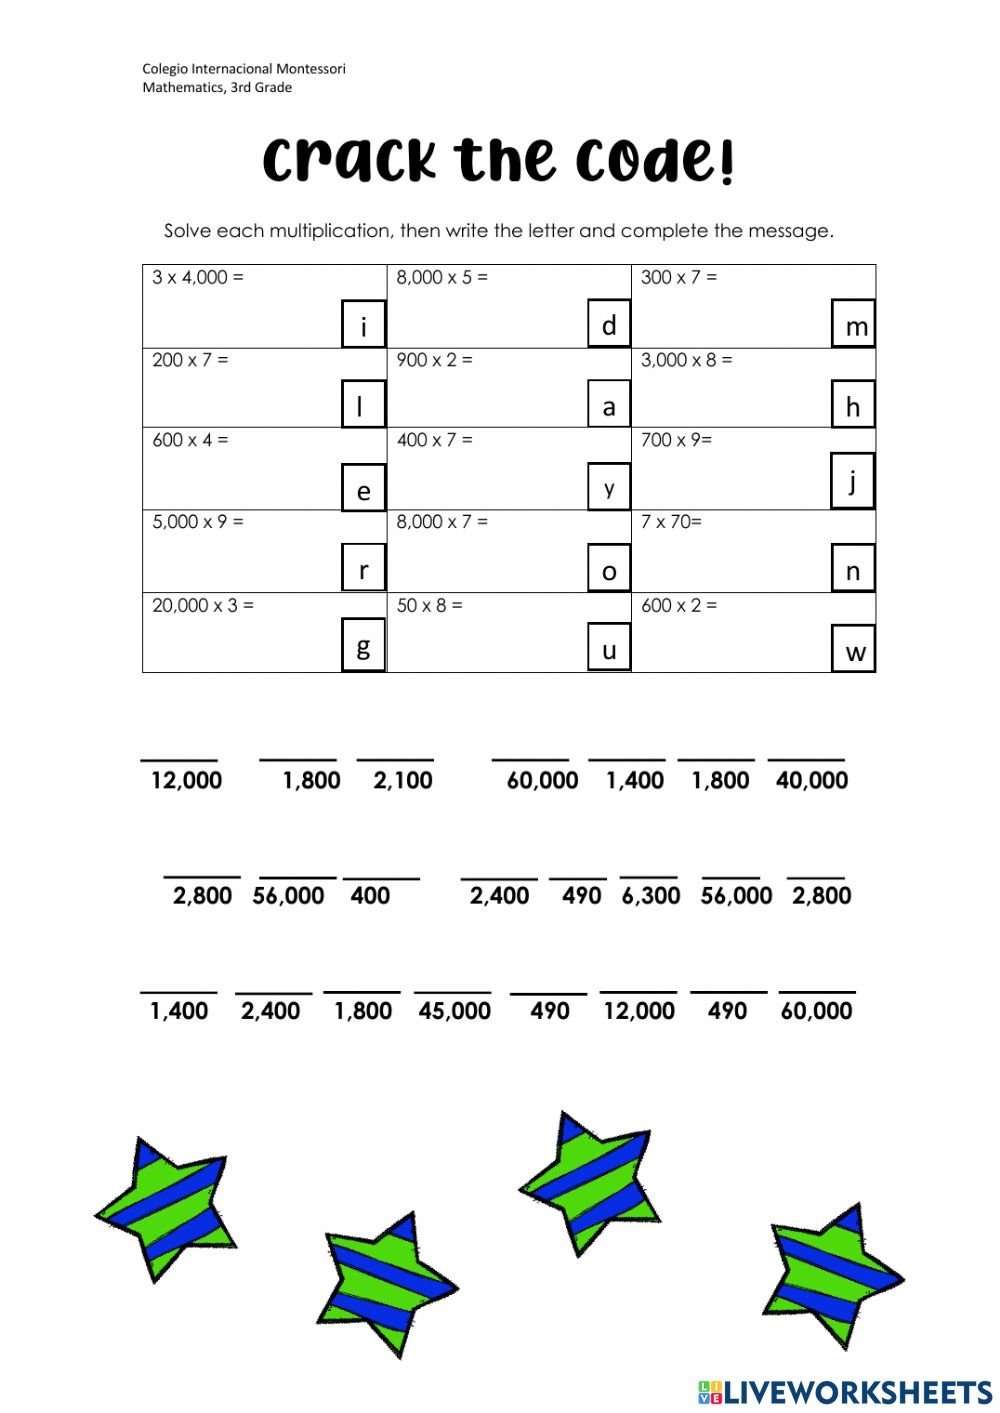 crack-the-code-activity-math-worksheet-answers